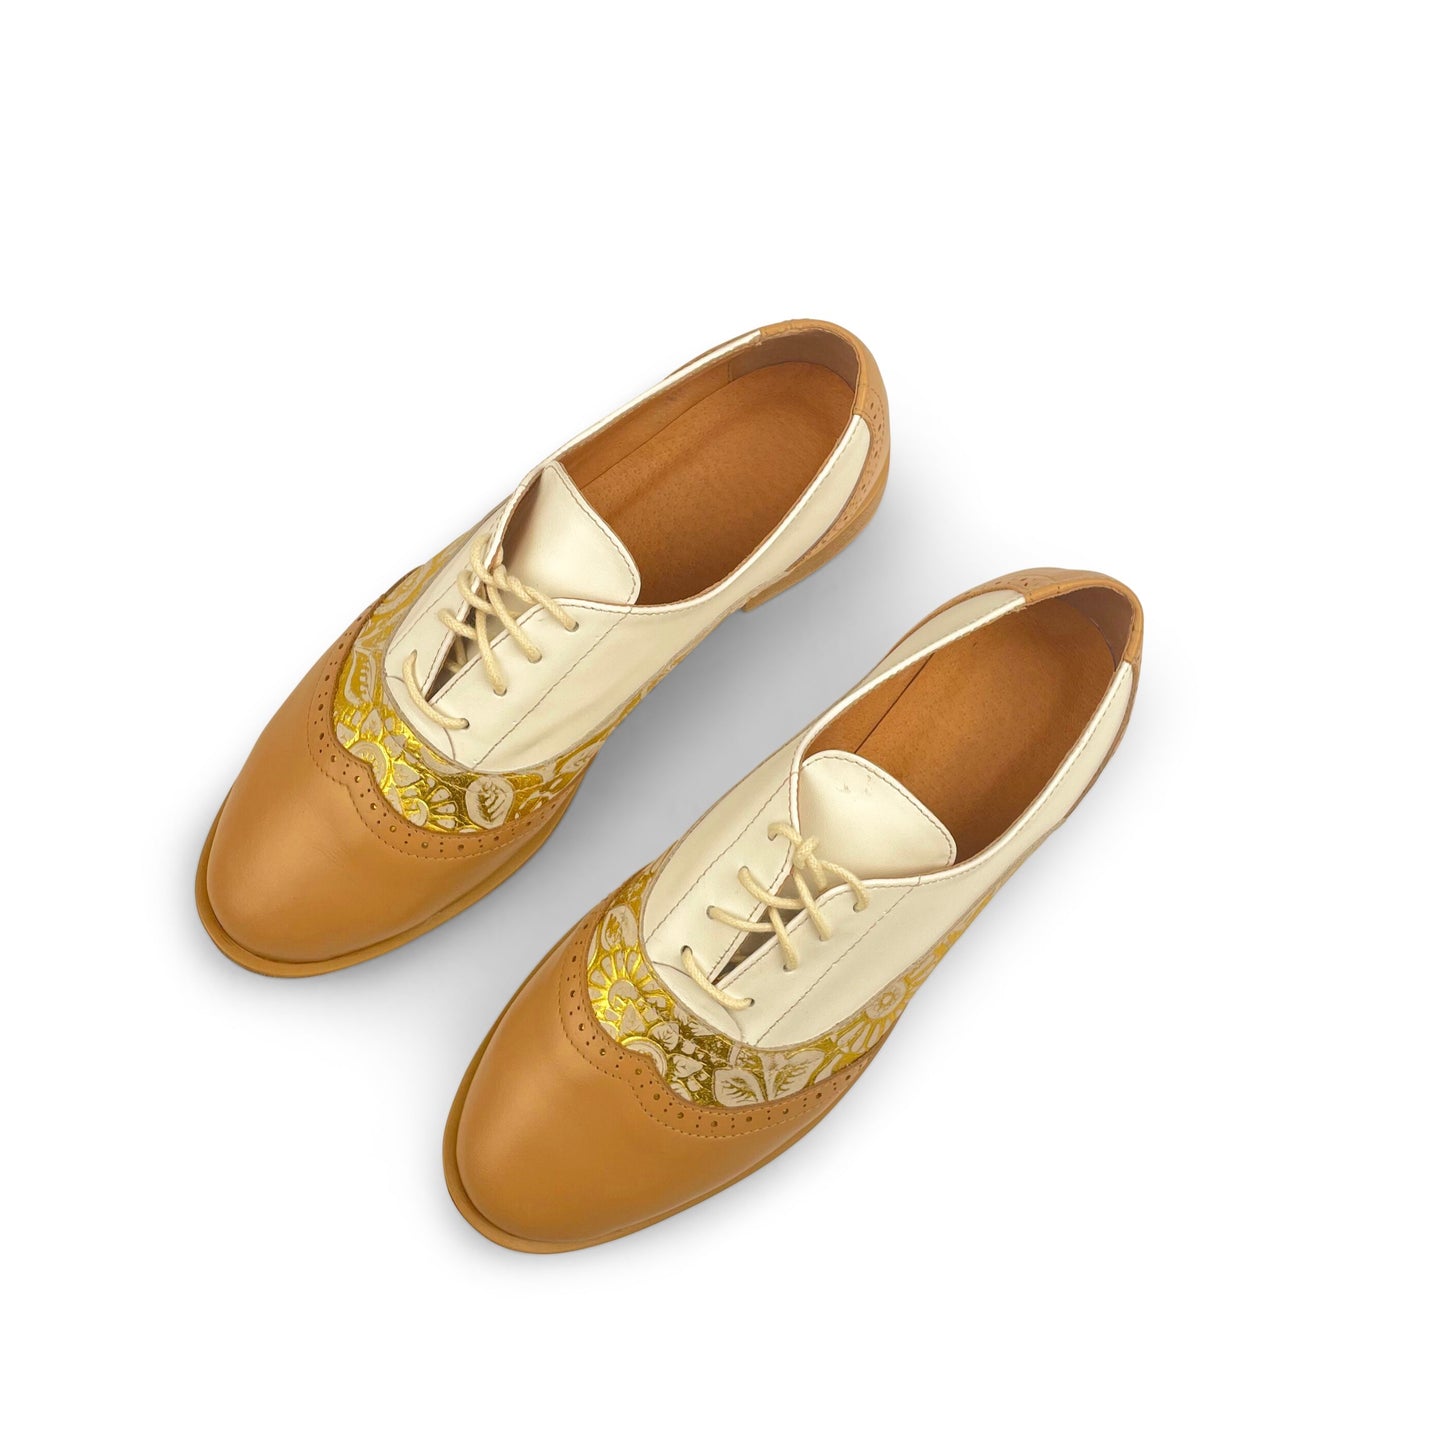 Three- Toned Oxford Shoes For Women